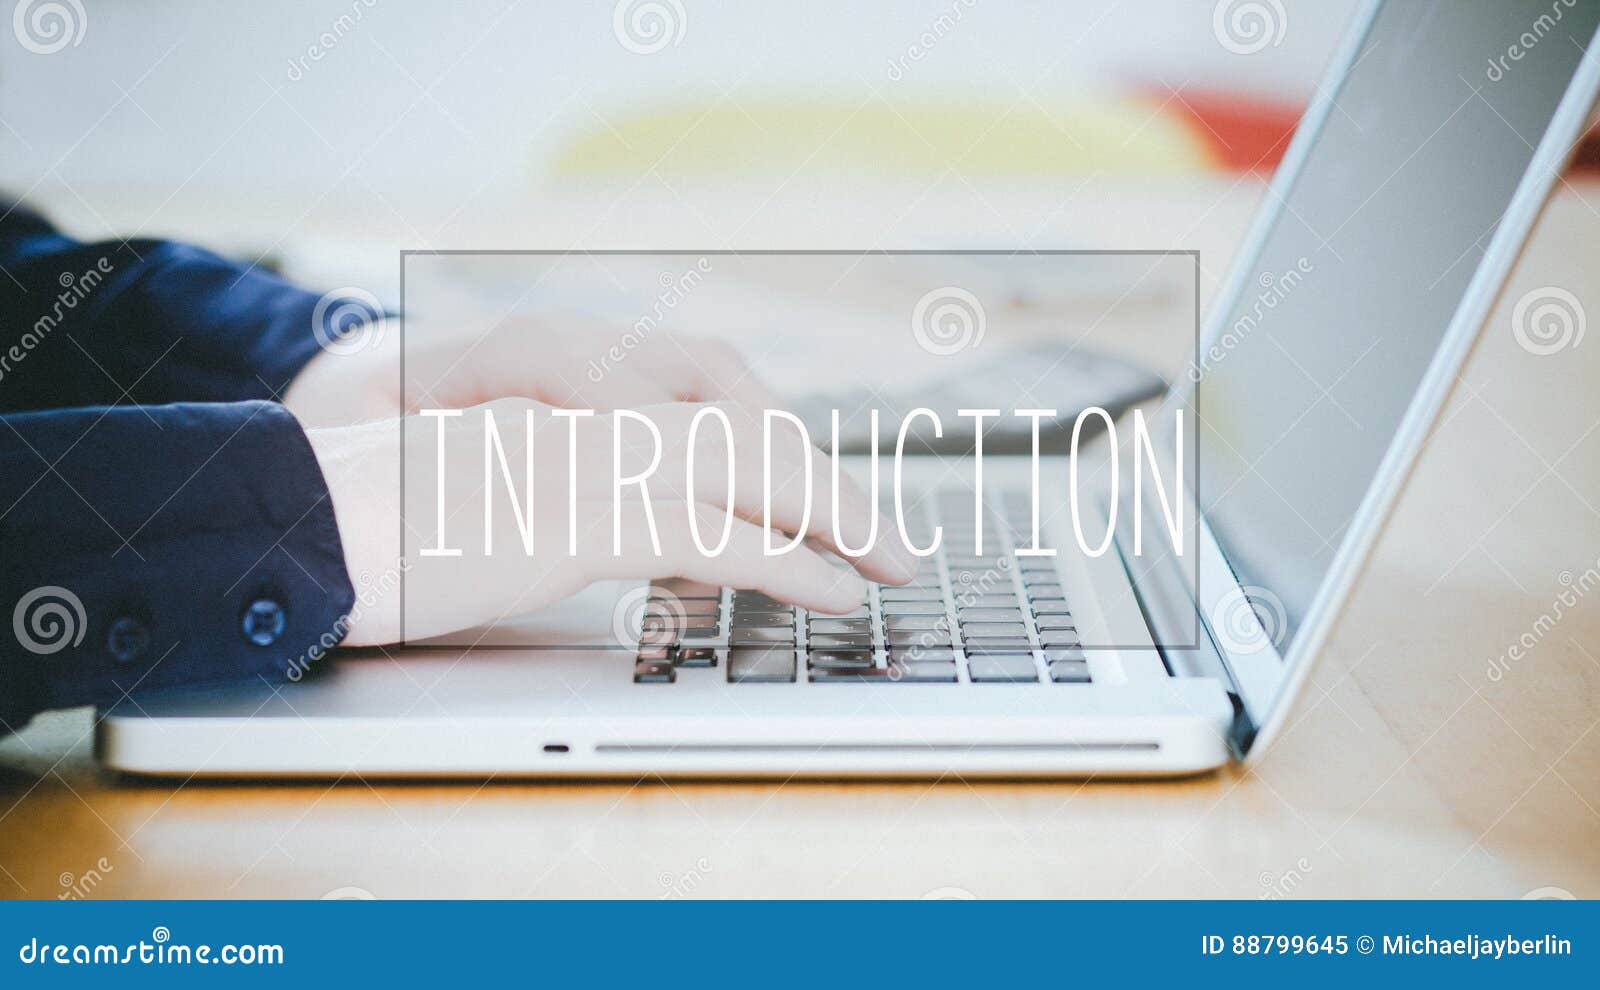 introduction, text over young man typing on laptop at desk